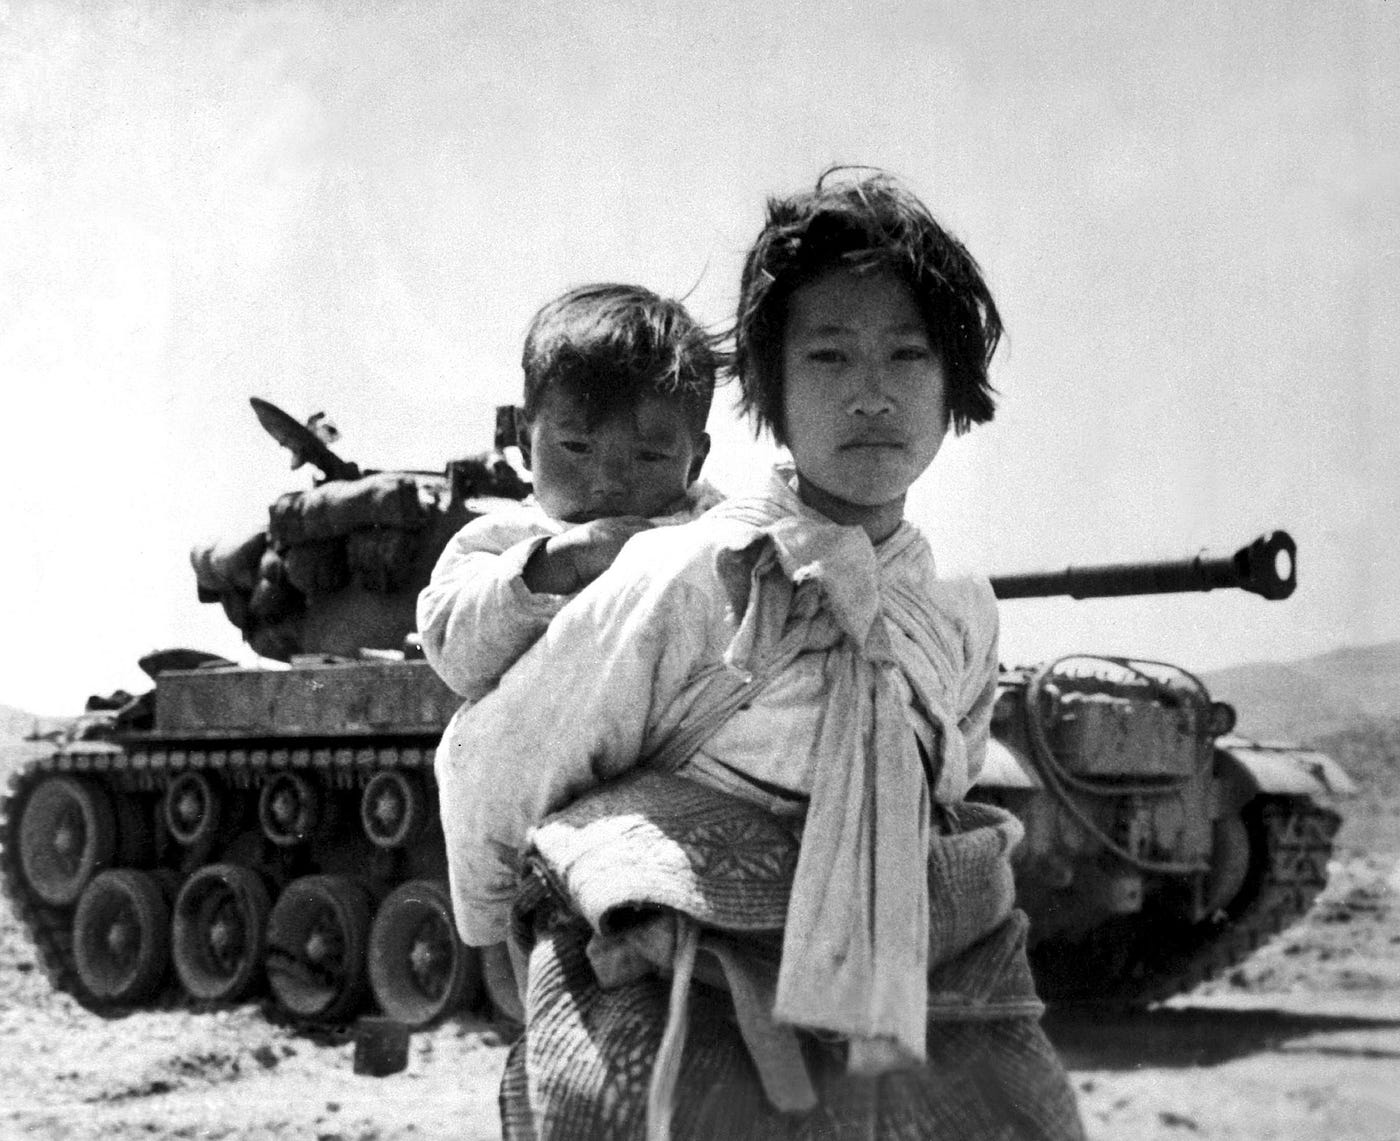 An archival photo from the Korean War. Carrying her baby brother on her back, a war weary Korean girl walks by a stalled M-26 tank, at Haengju, Korea, June, 1951.